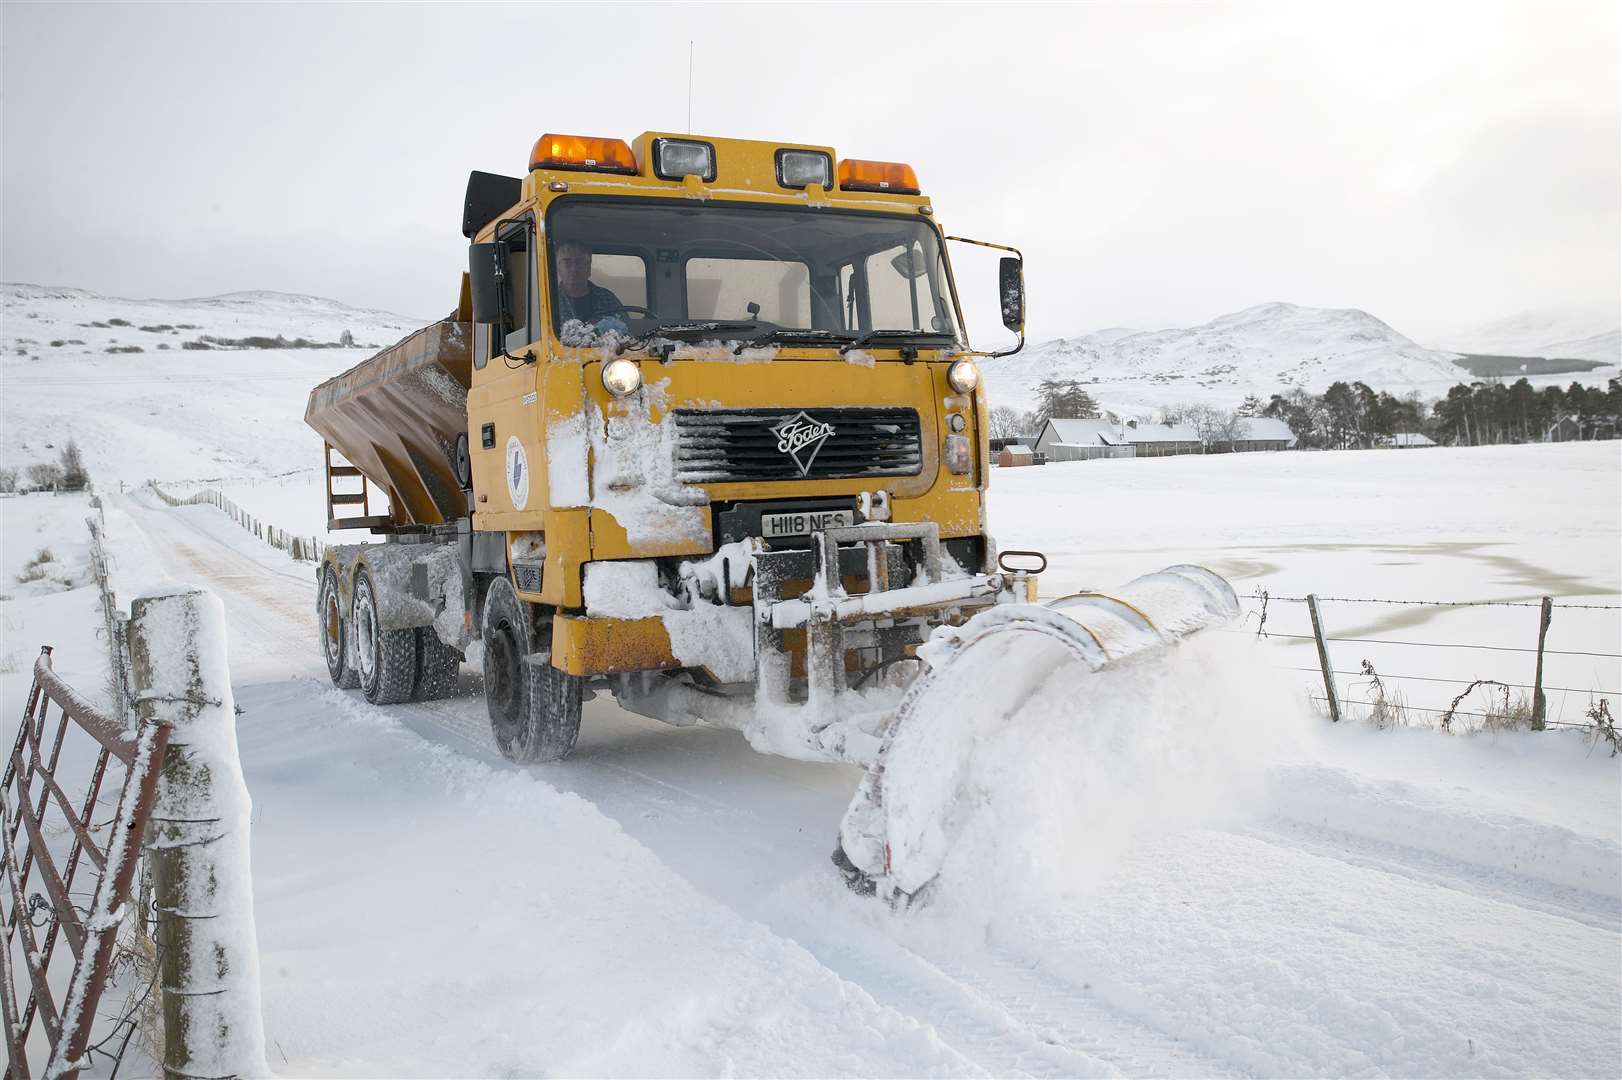 Gritters were in action this morning across the Highlands.